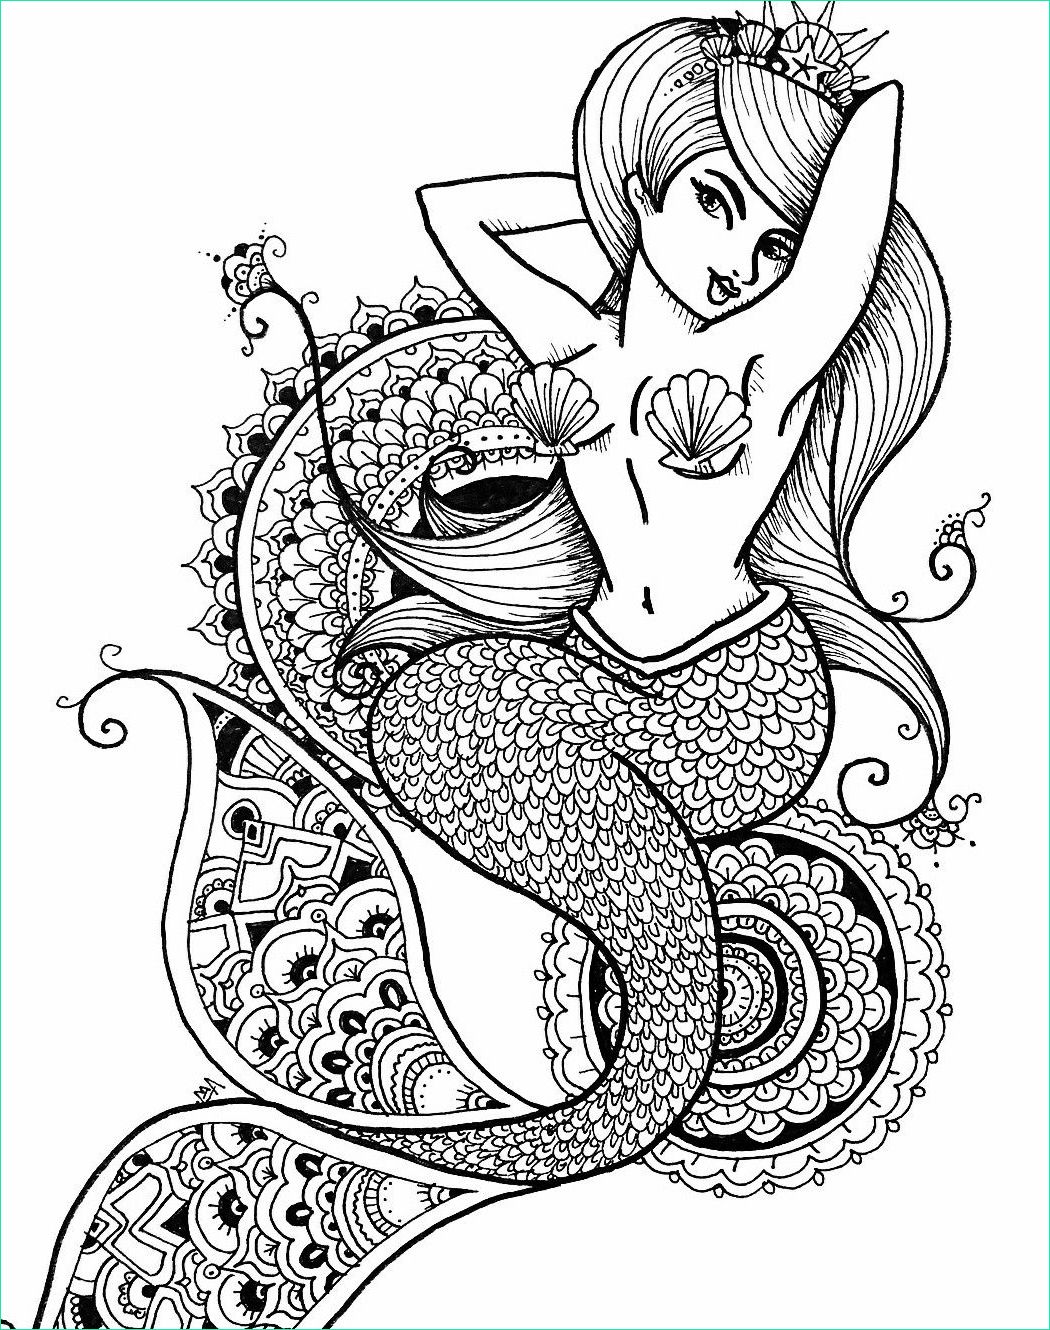 Dessin De Sirène Facile Beau Collection Pin by Elisabeth Quisenberry On Coloring therapy Sirens